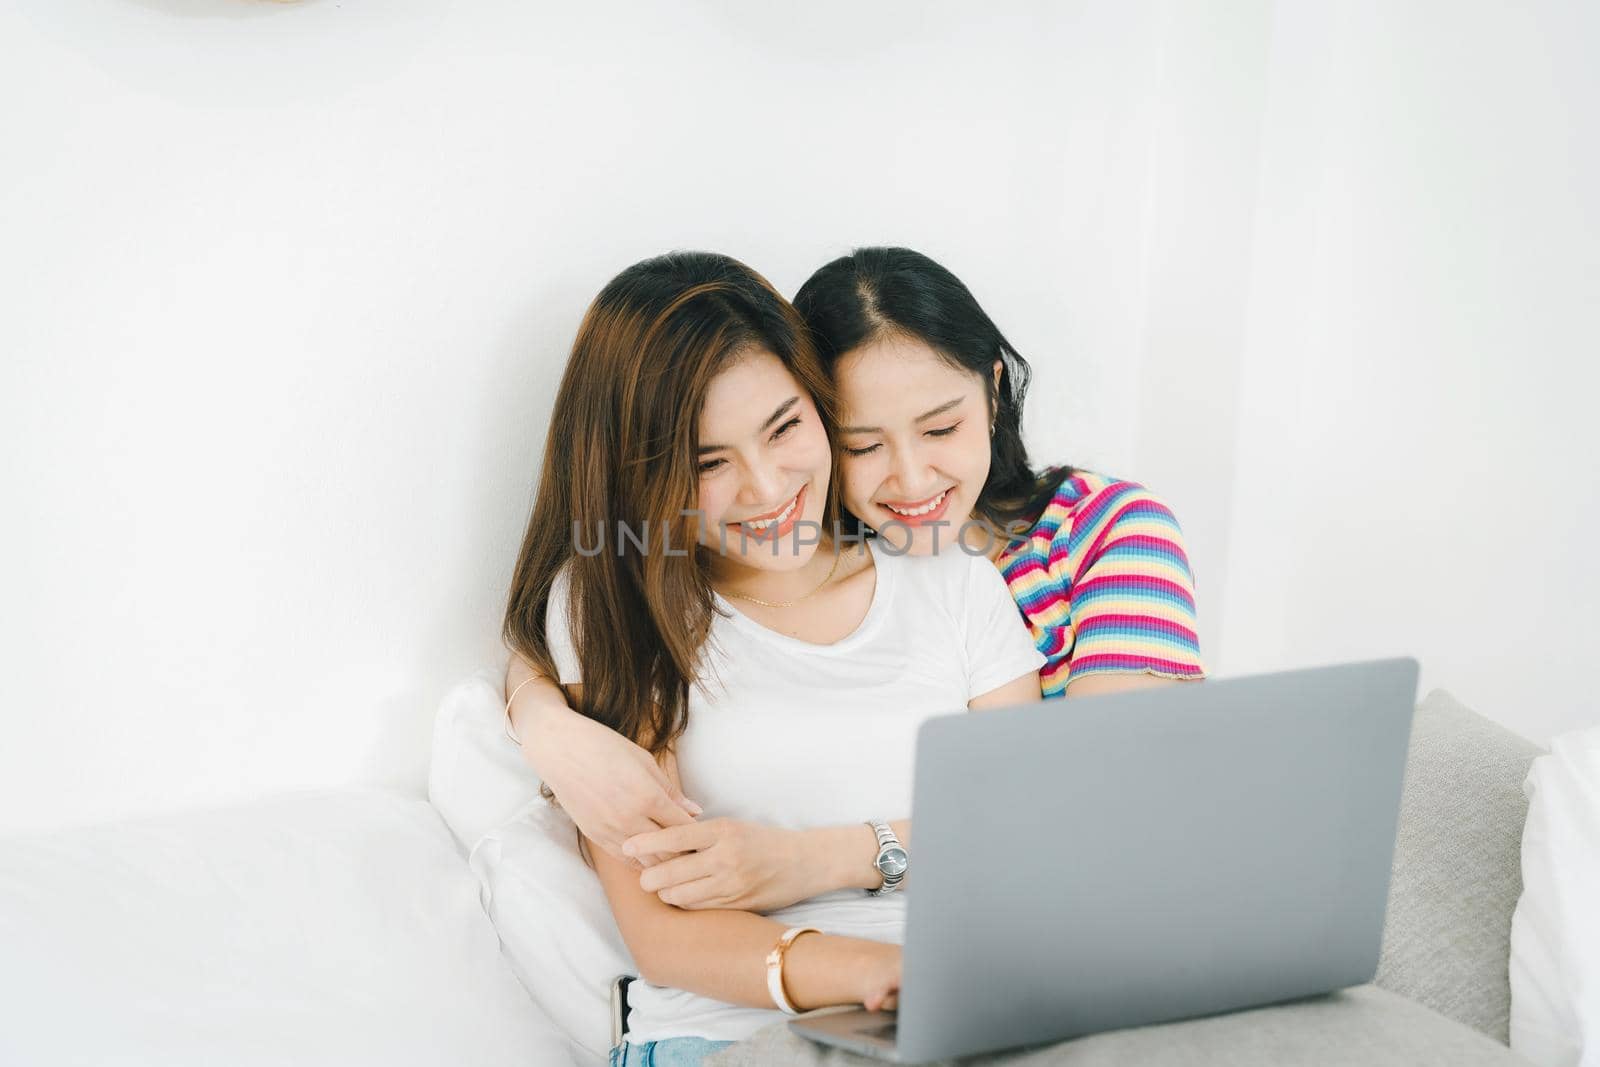 lgbtq, lgbt concept, homosexuality, portrait of two asian women posing happy together and loving each other while playing computer laptop on bed.